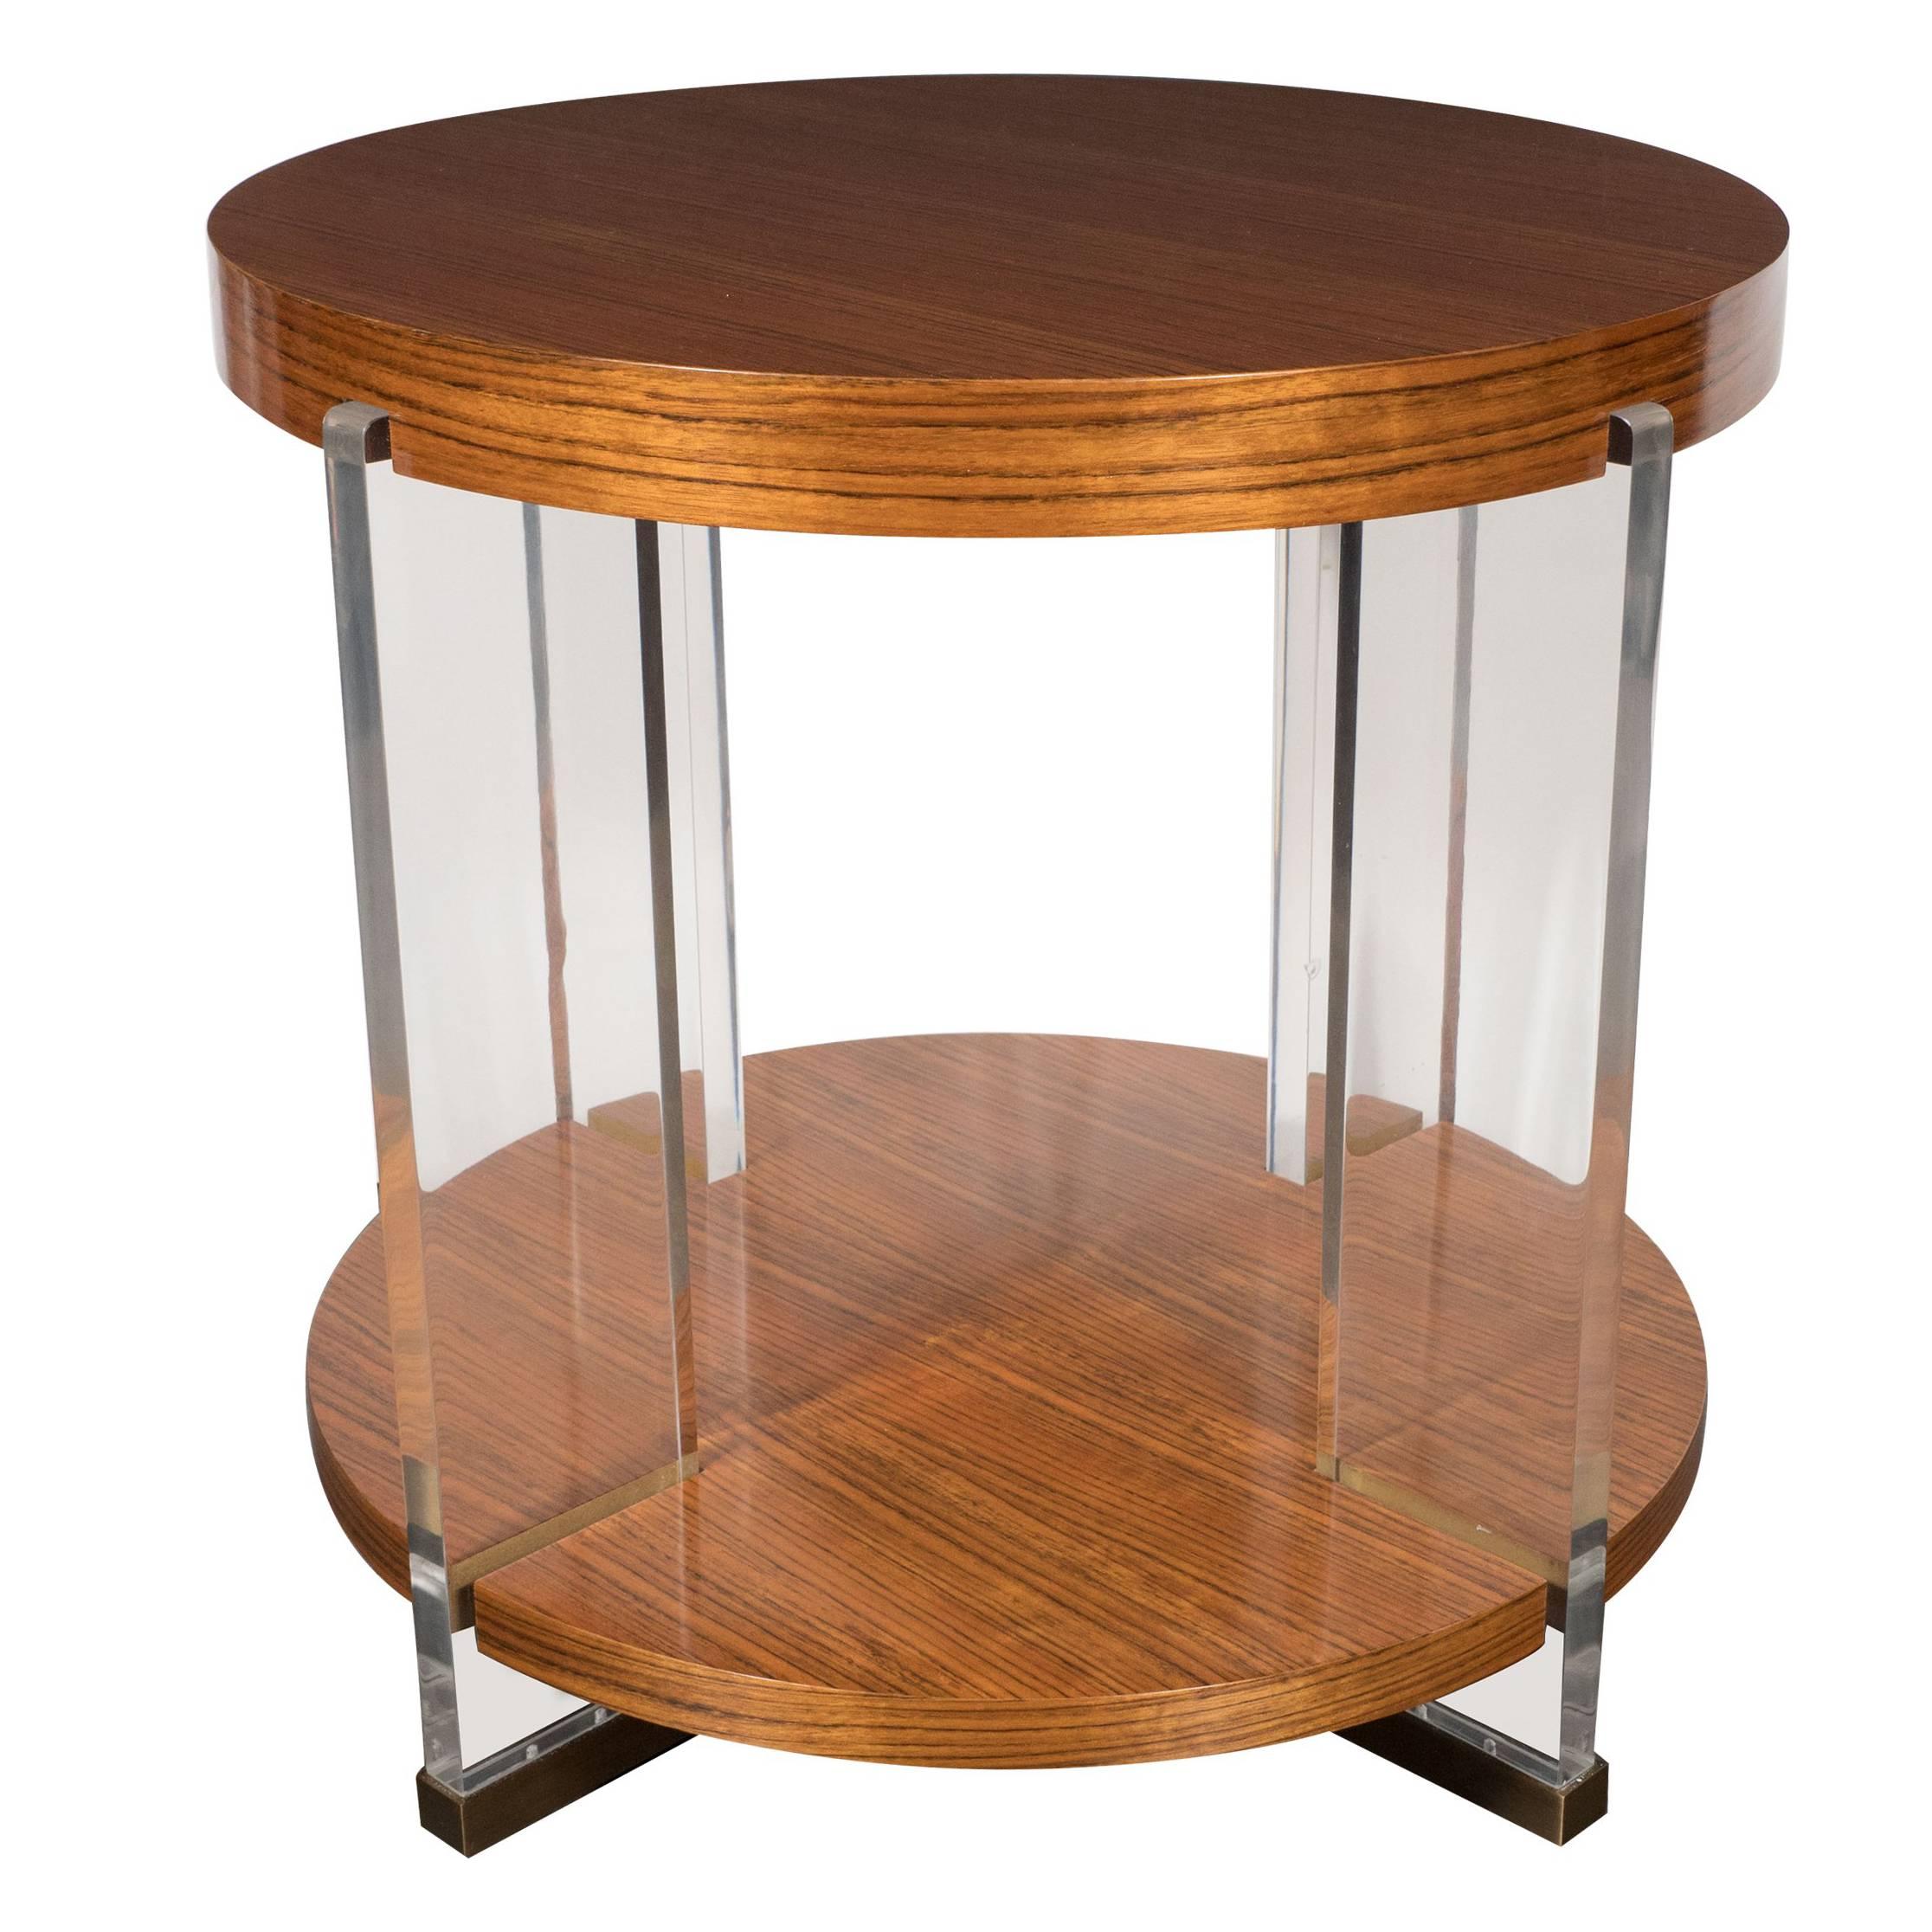 Vanguard Circular Table in Bookmatched Mozambique with Lucite Supports